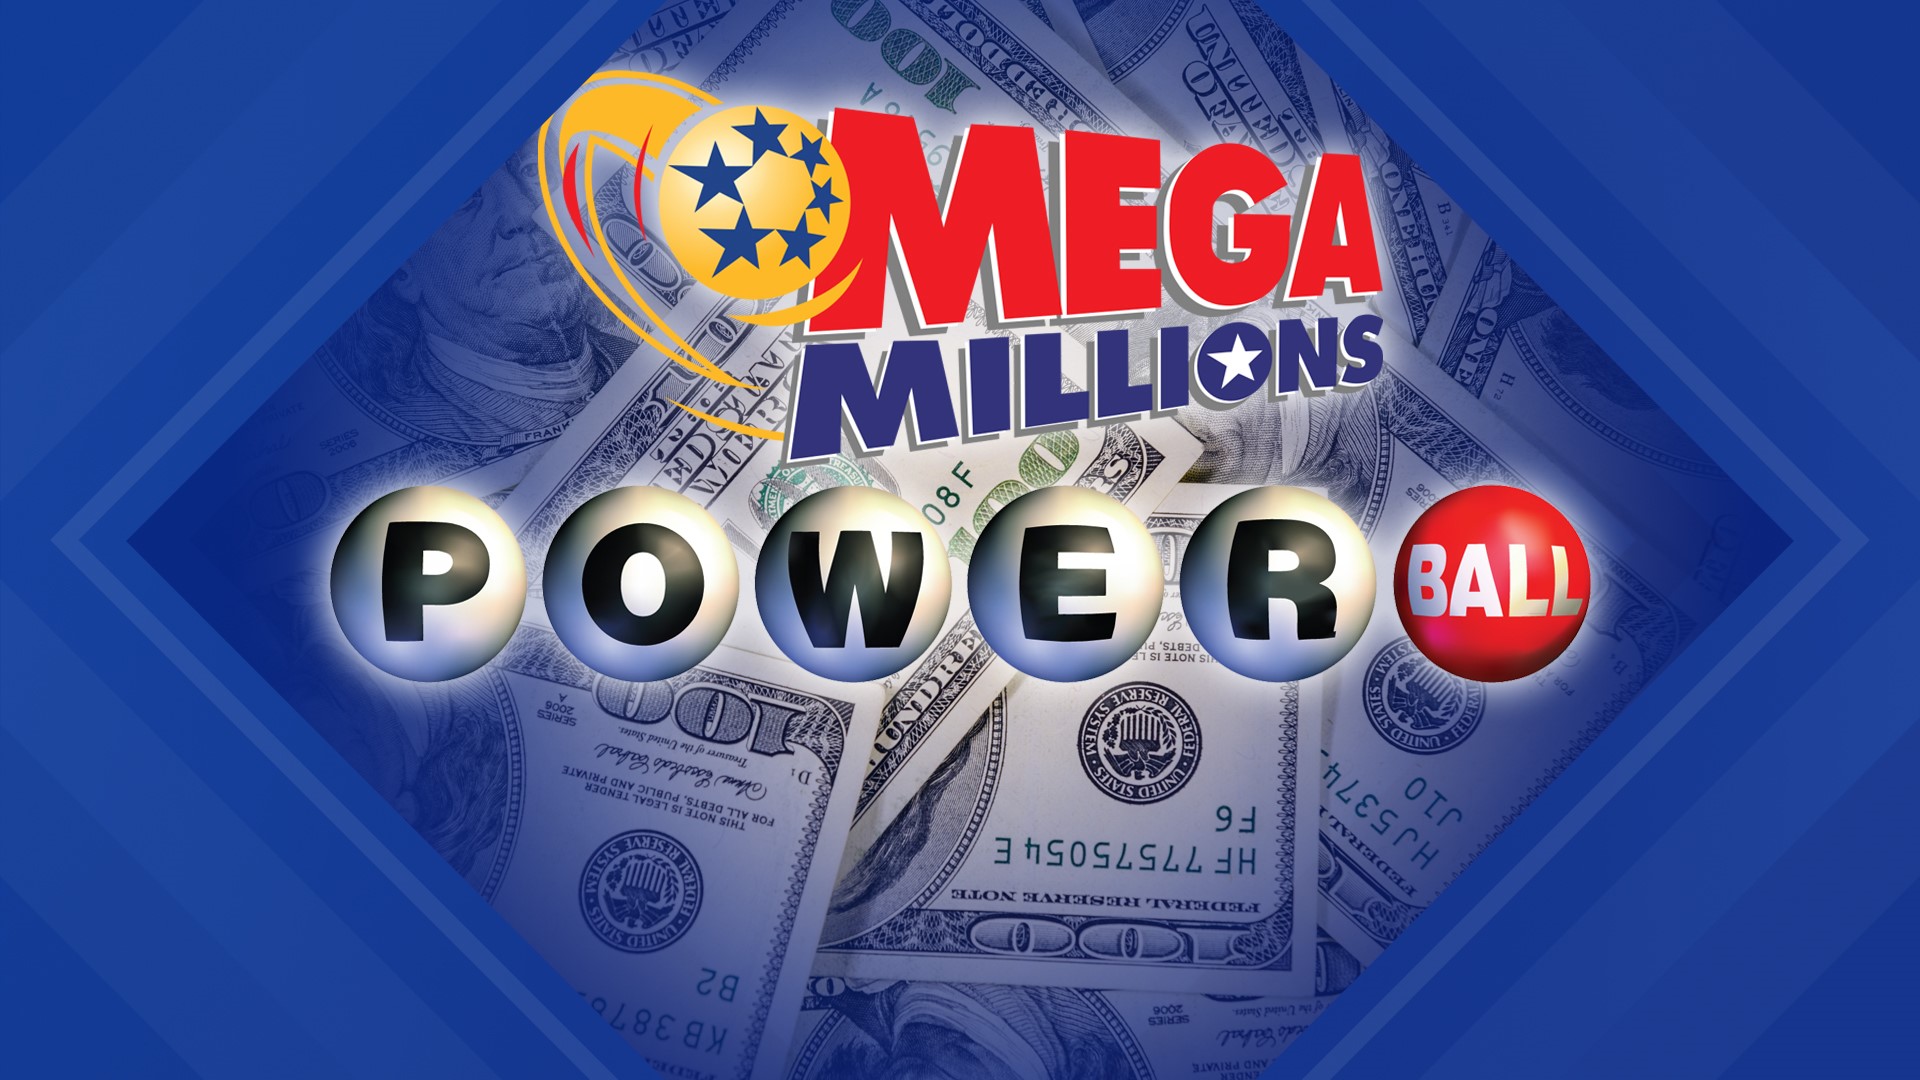 Powerball jackpot jumps to 730M and Mega Millions to 850M